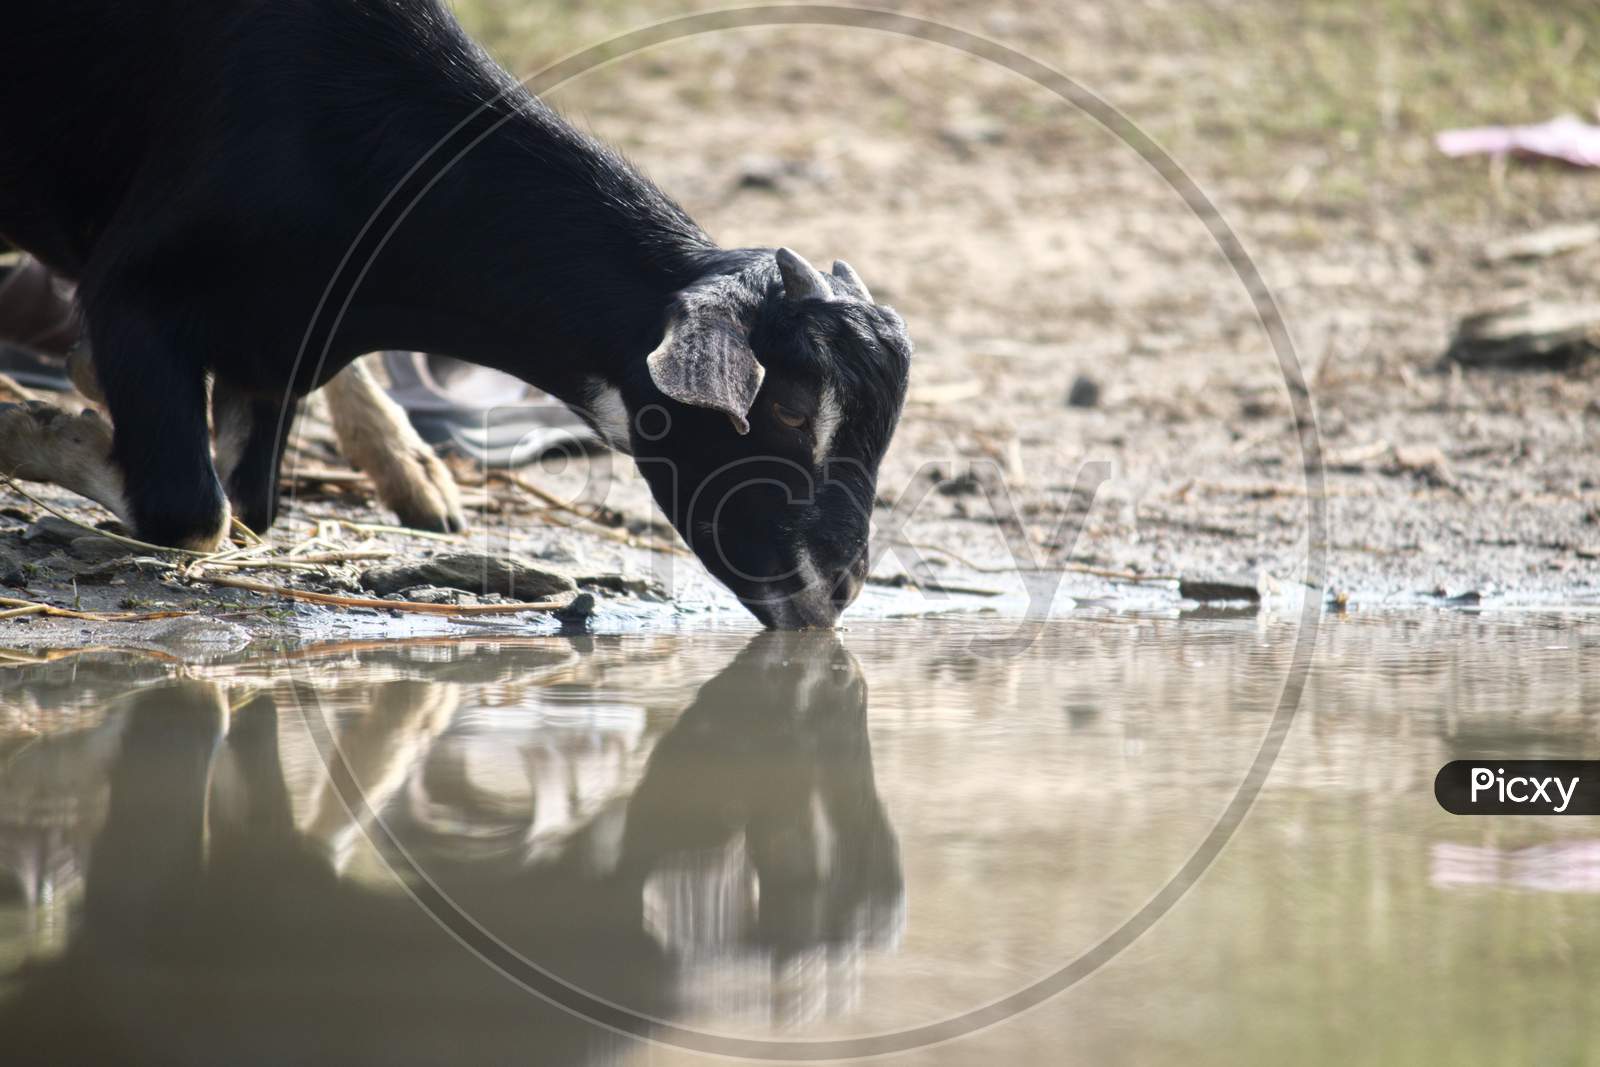 Goat Drinking Water From A Pond In Summer In Indian Countryside Area